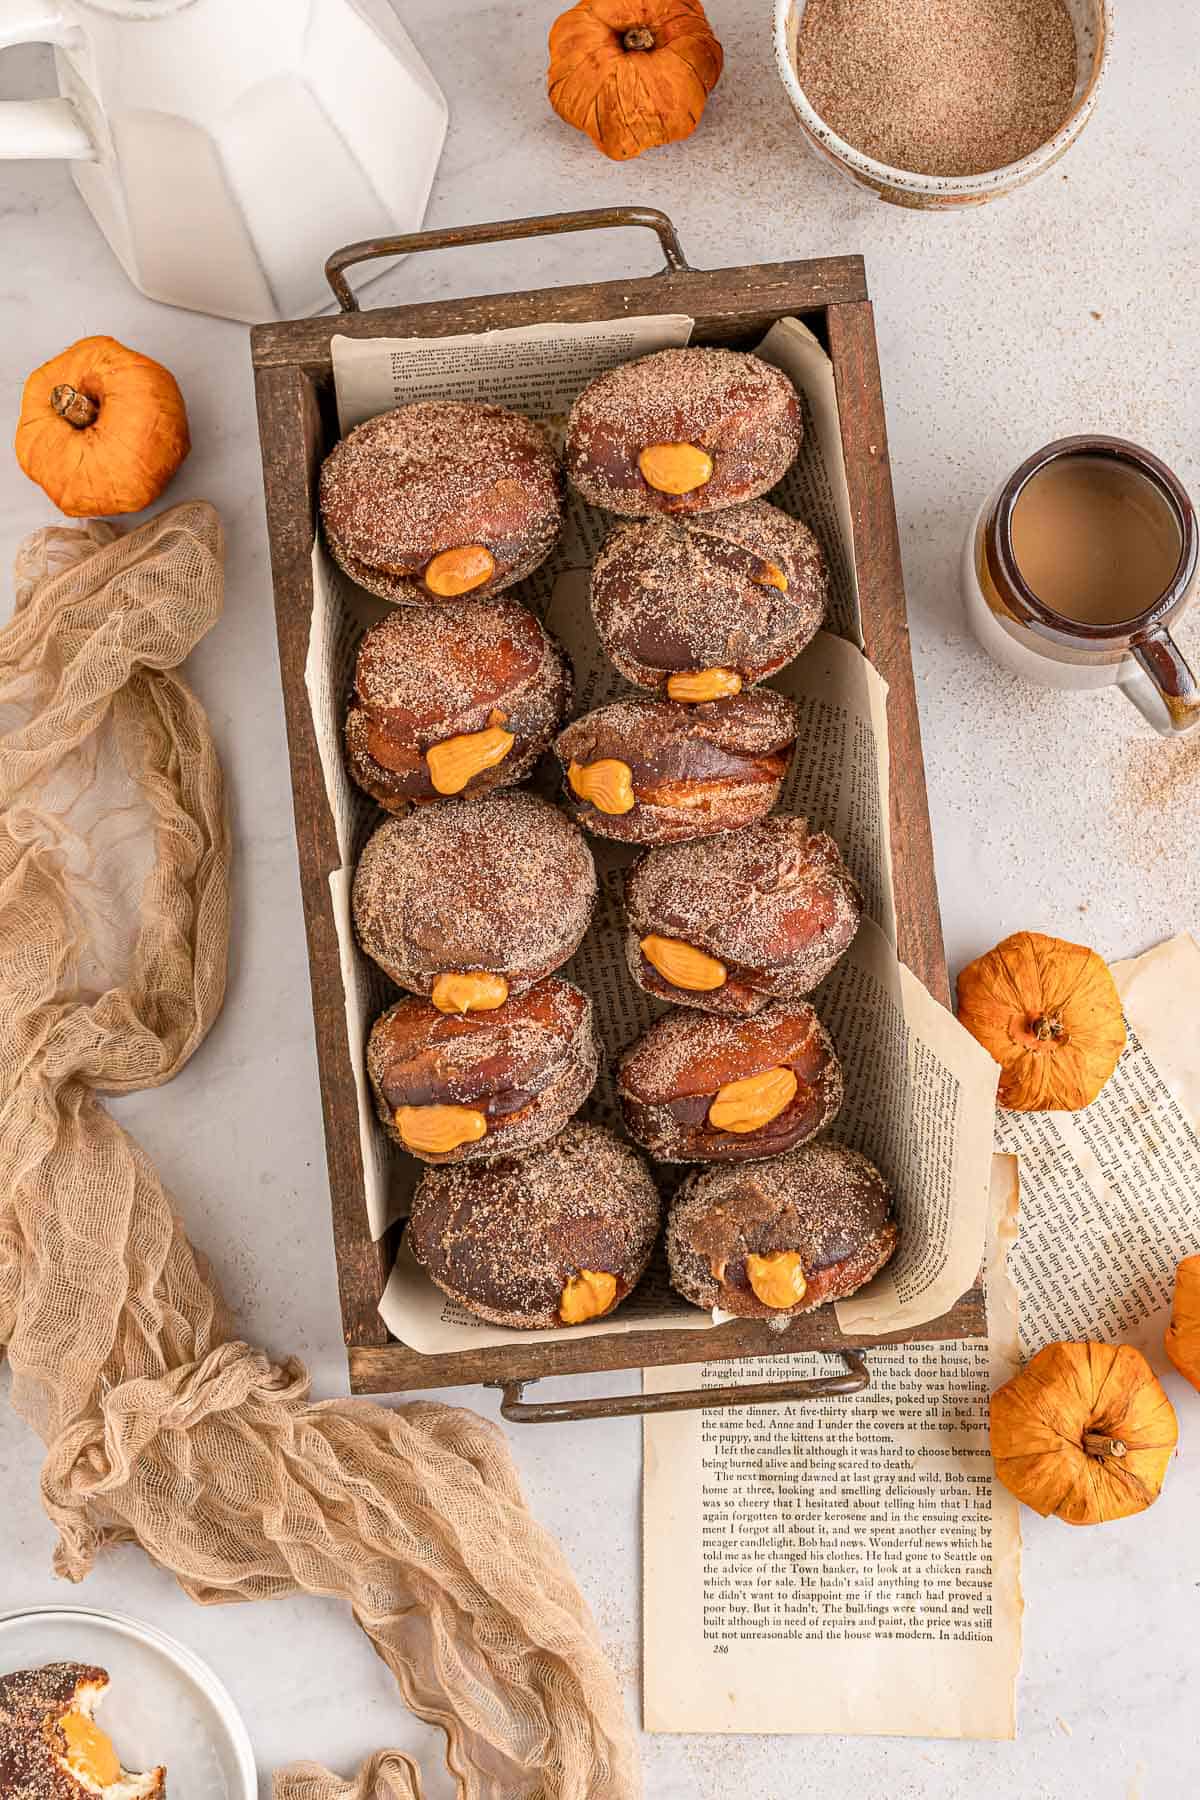 Overhead of pumpkin filled donuts in a wood box with pumpkins, a towel and spices around it.